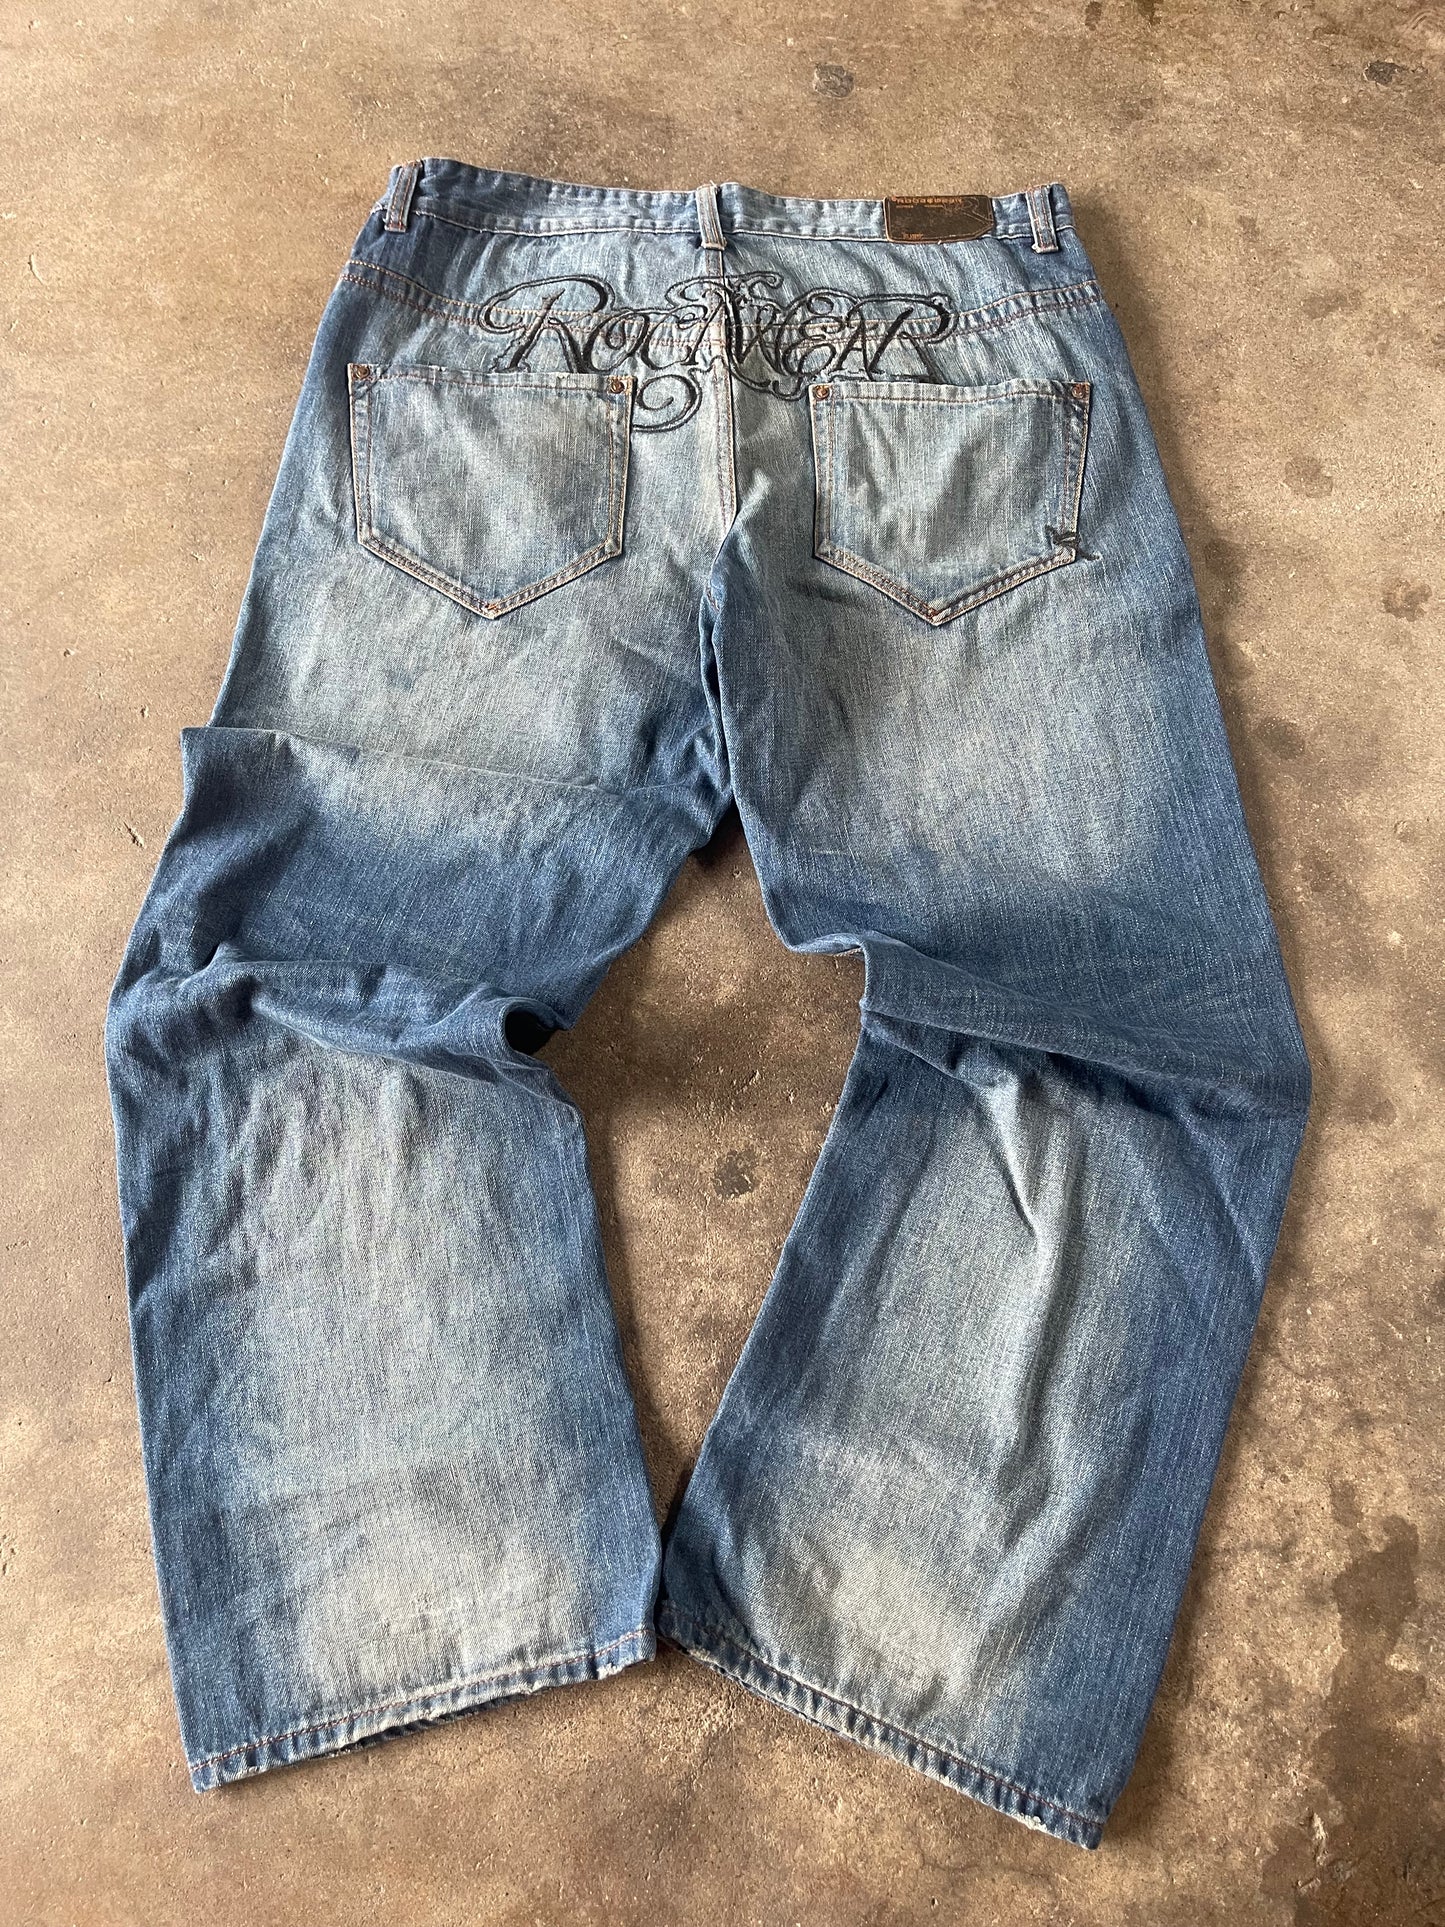 Baggy Embroidered Rocawear Jeans 41x34